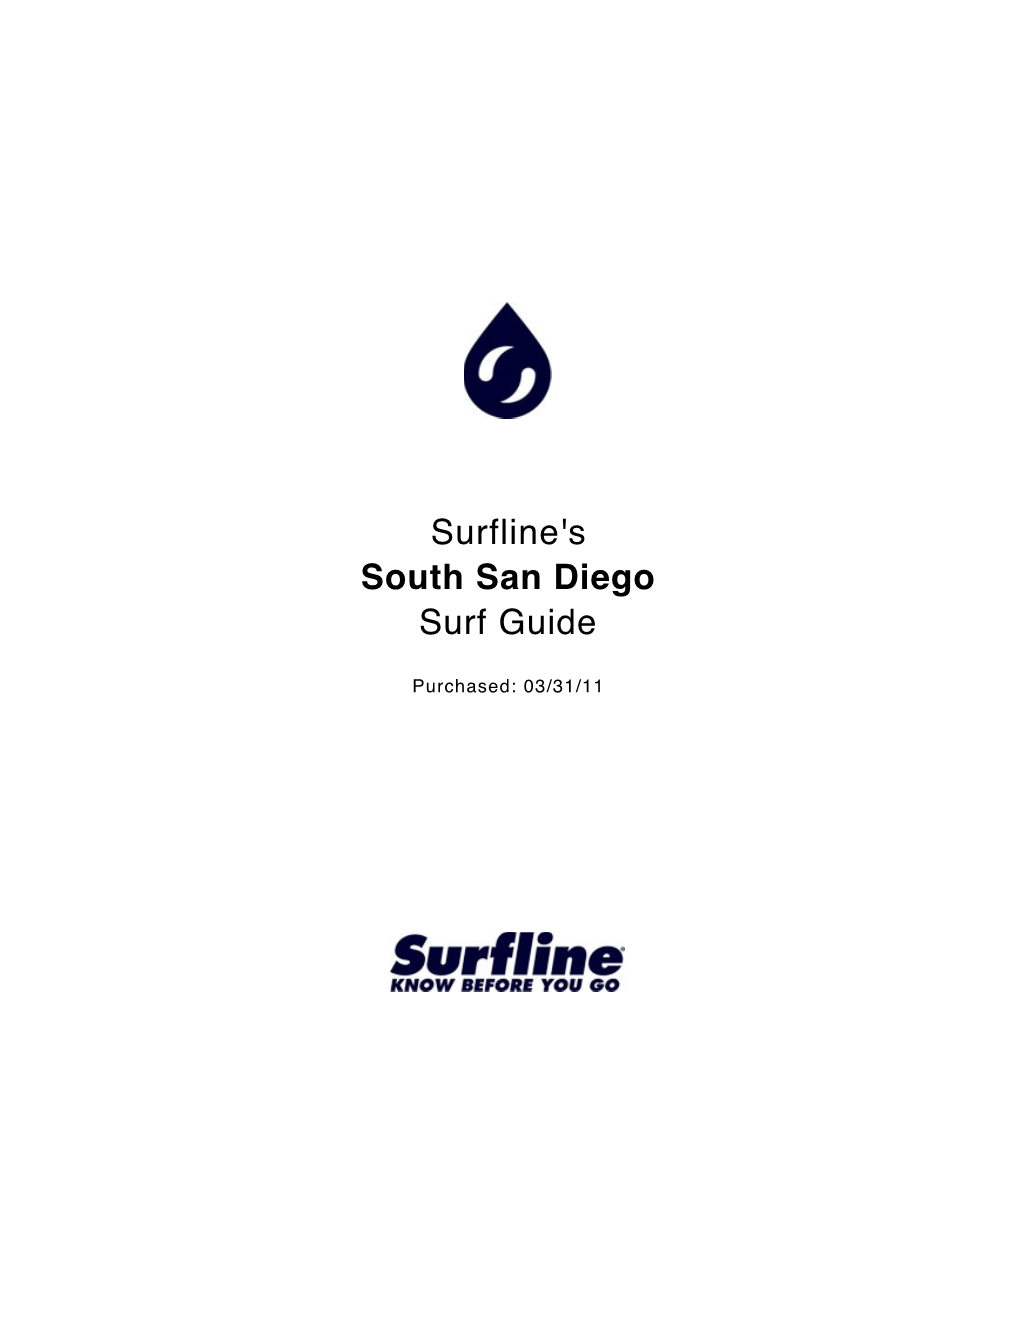 South San Diego Surf Guide